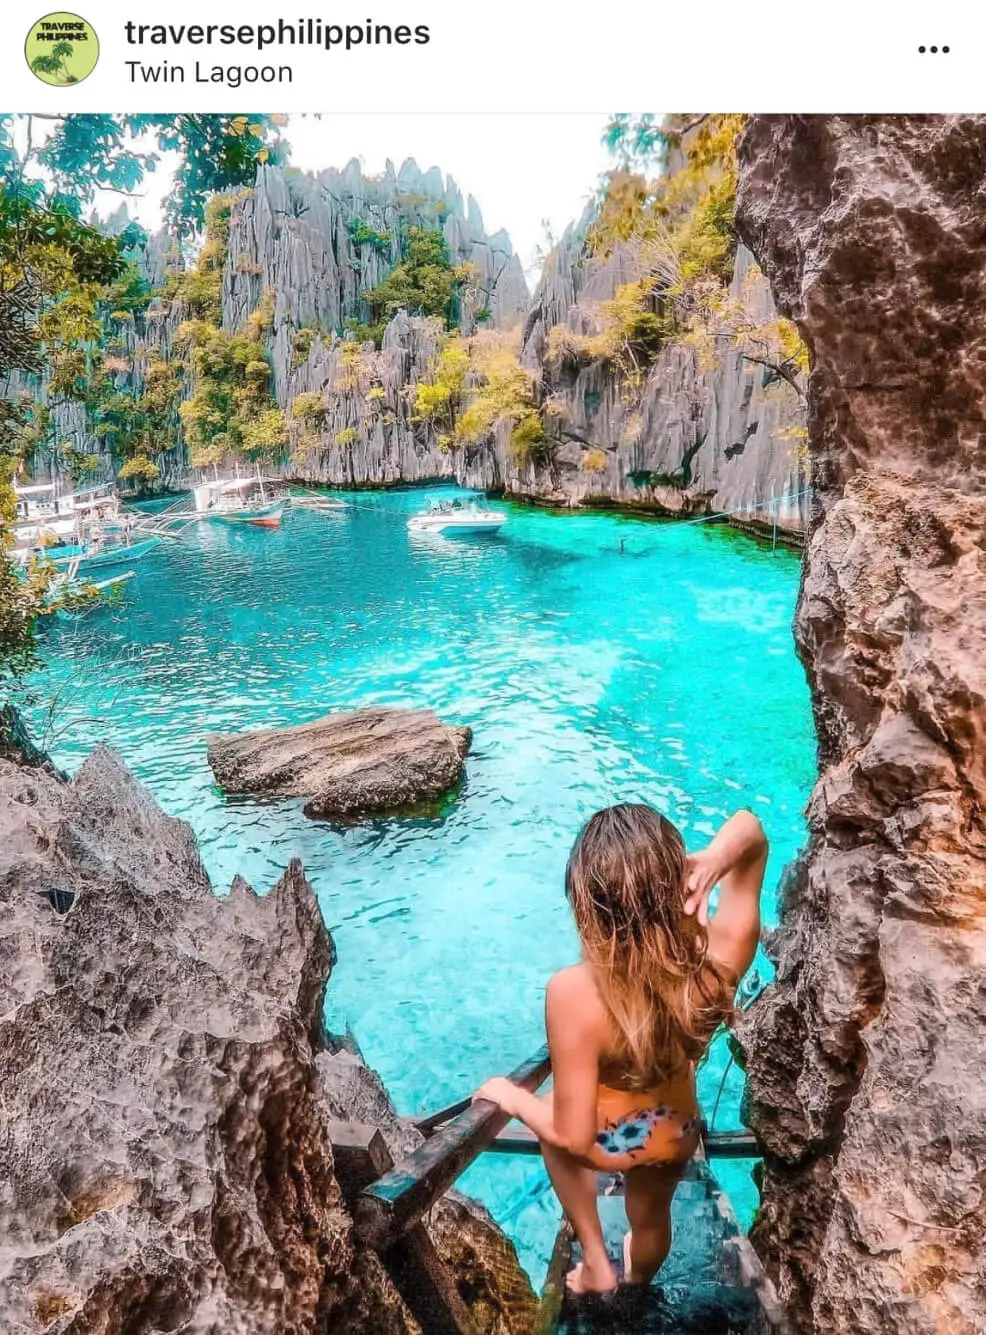 Twin Lagoon - The Top 20 Best Instagram Locations in the Philippines!